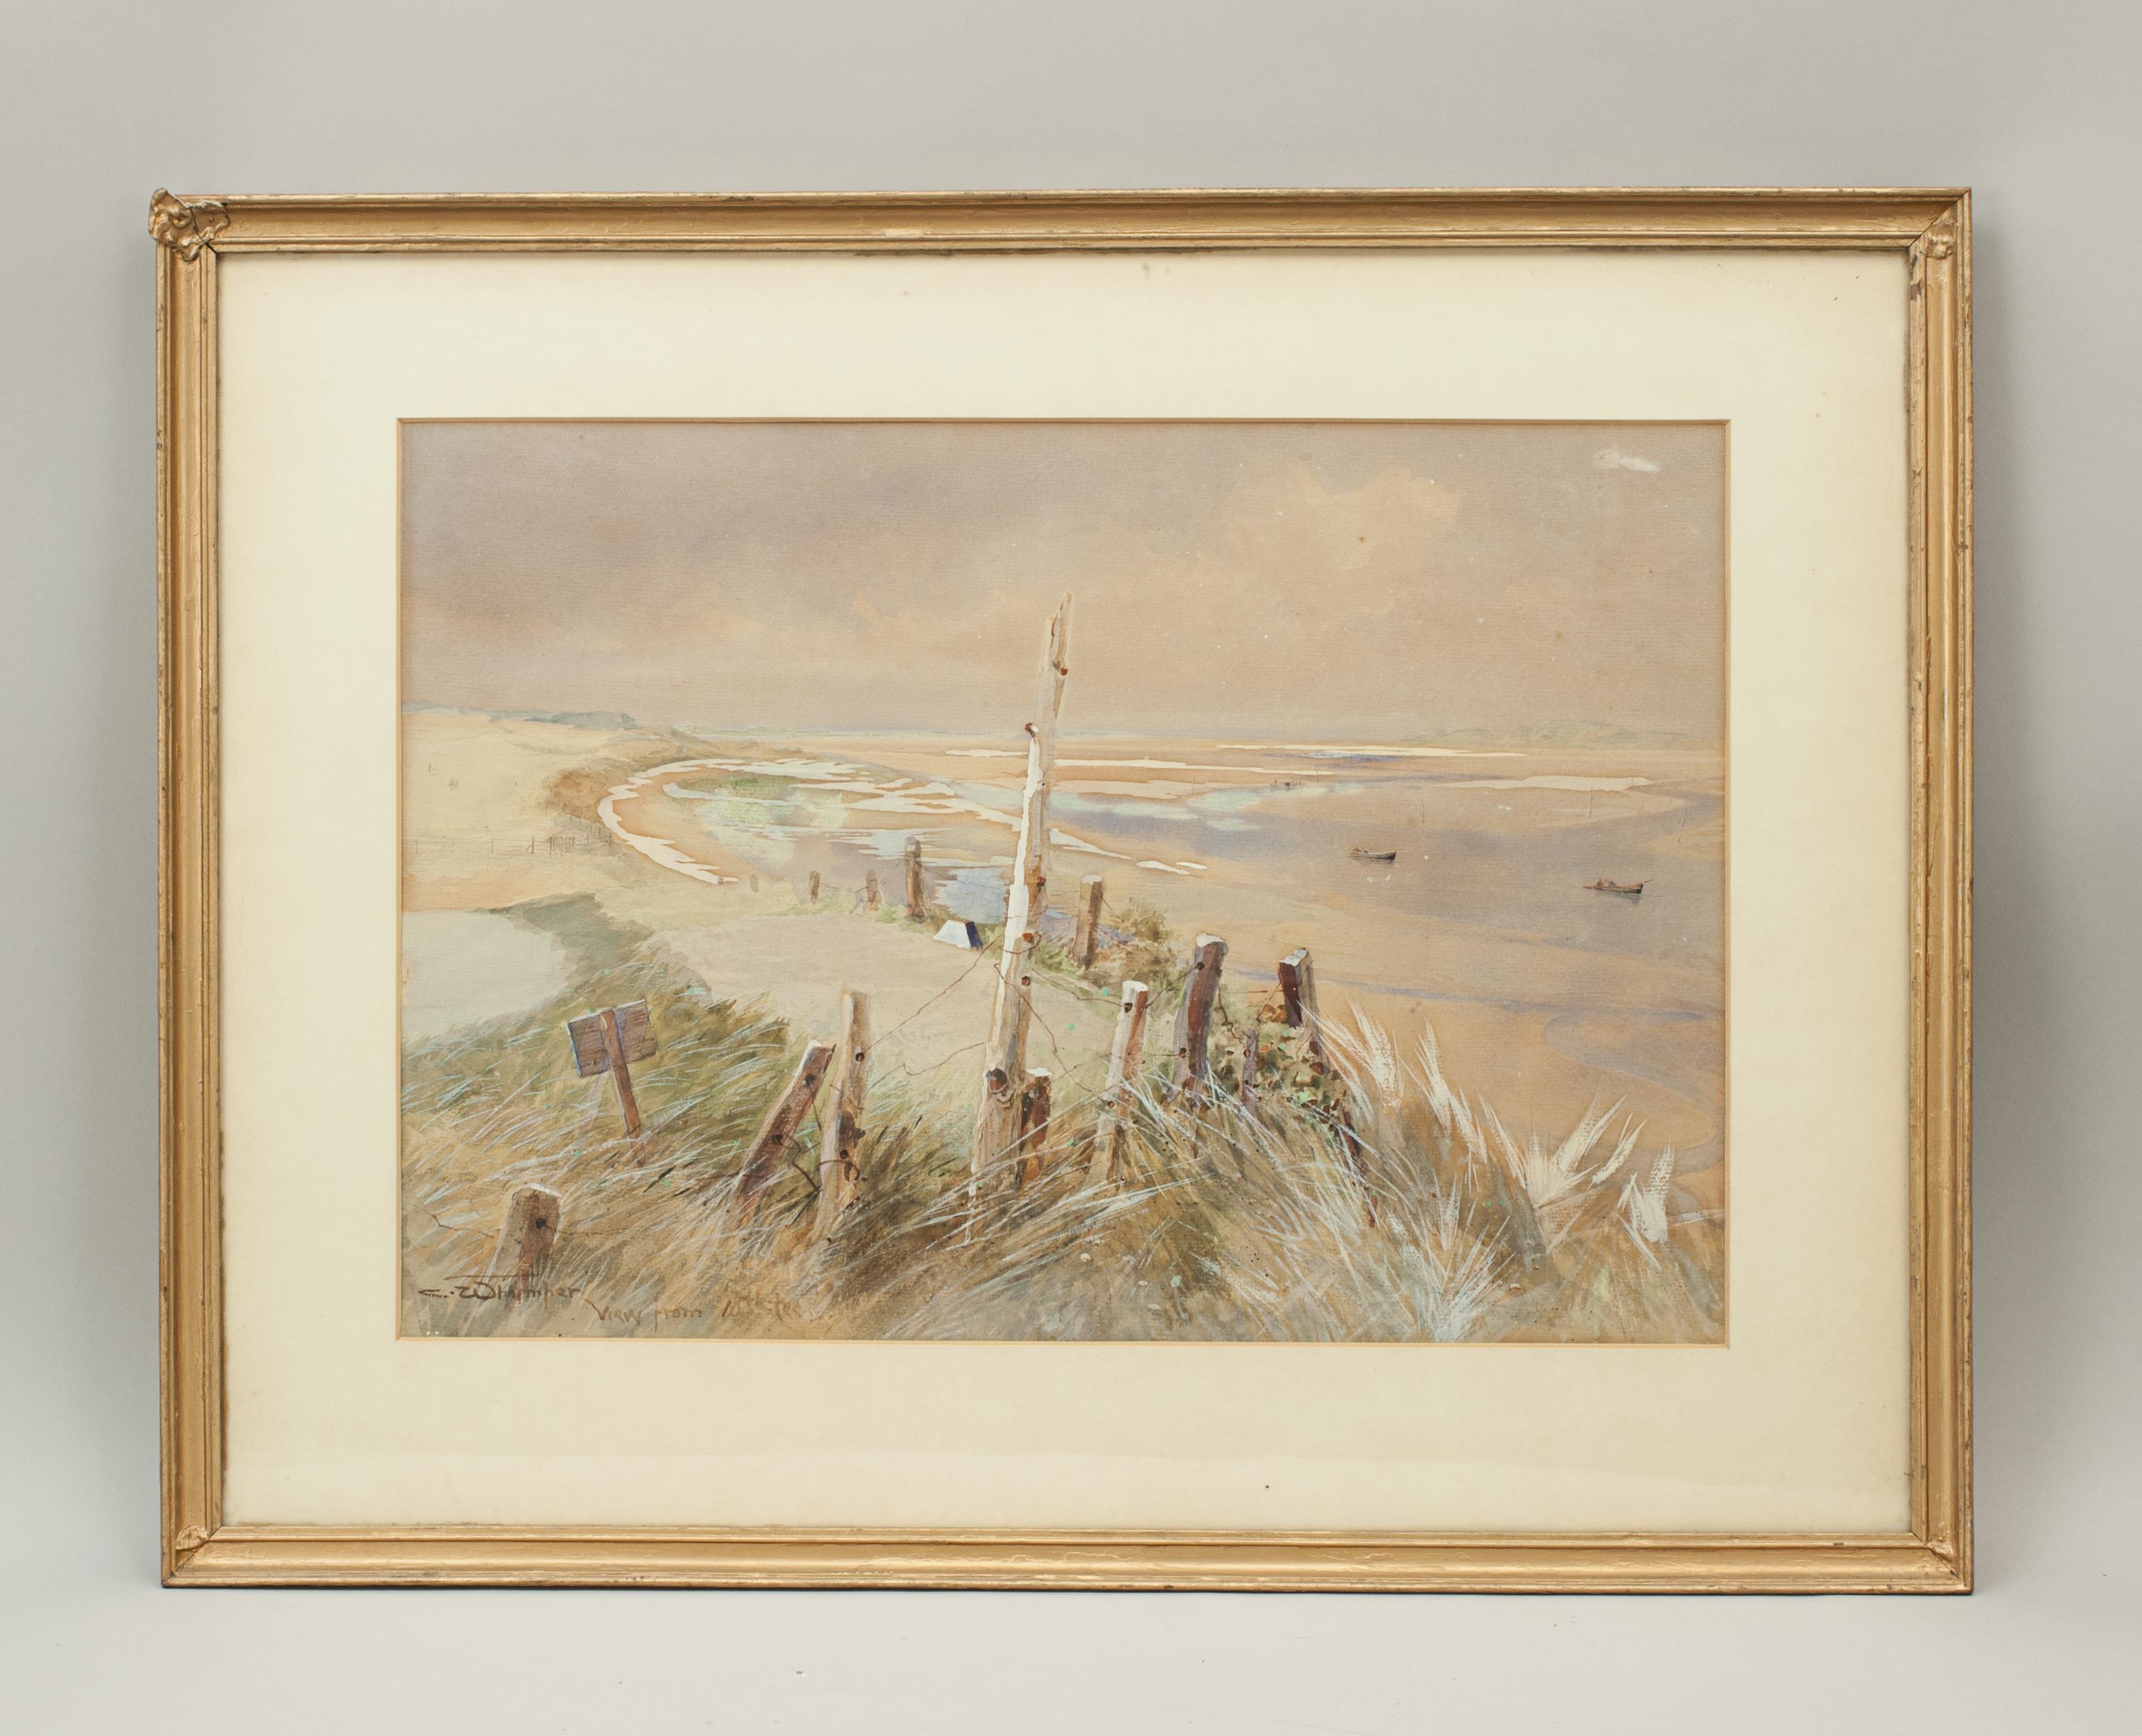 View from the 10th tee at Brancaster golf club by Charles Whymper.
A wonderful framed original watercolor painting of the view from the 10th tee at Brancaster Golf Club. Signed by the artist, Charles Whymper, with the title view from 10th tee. A